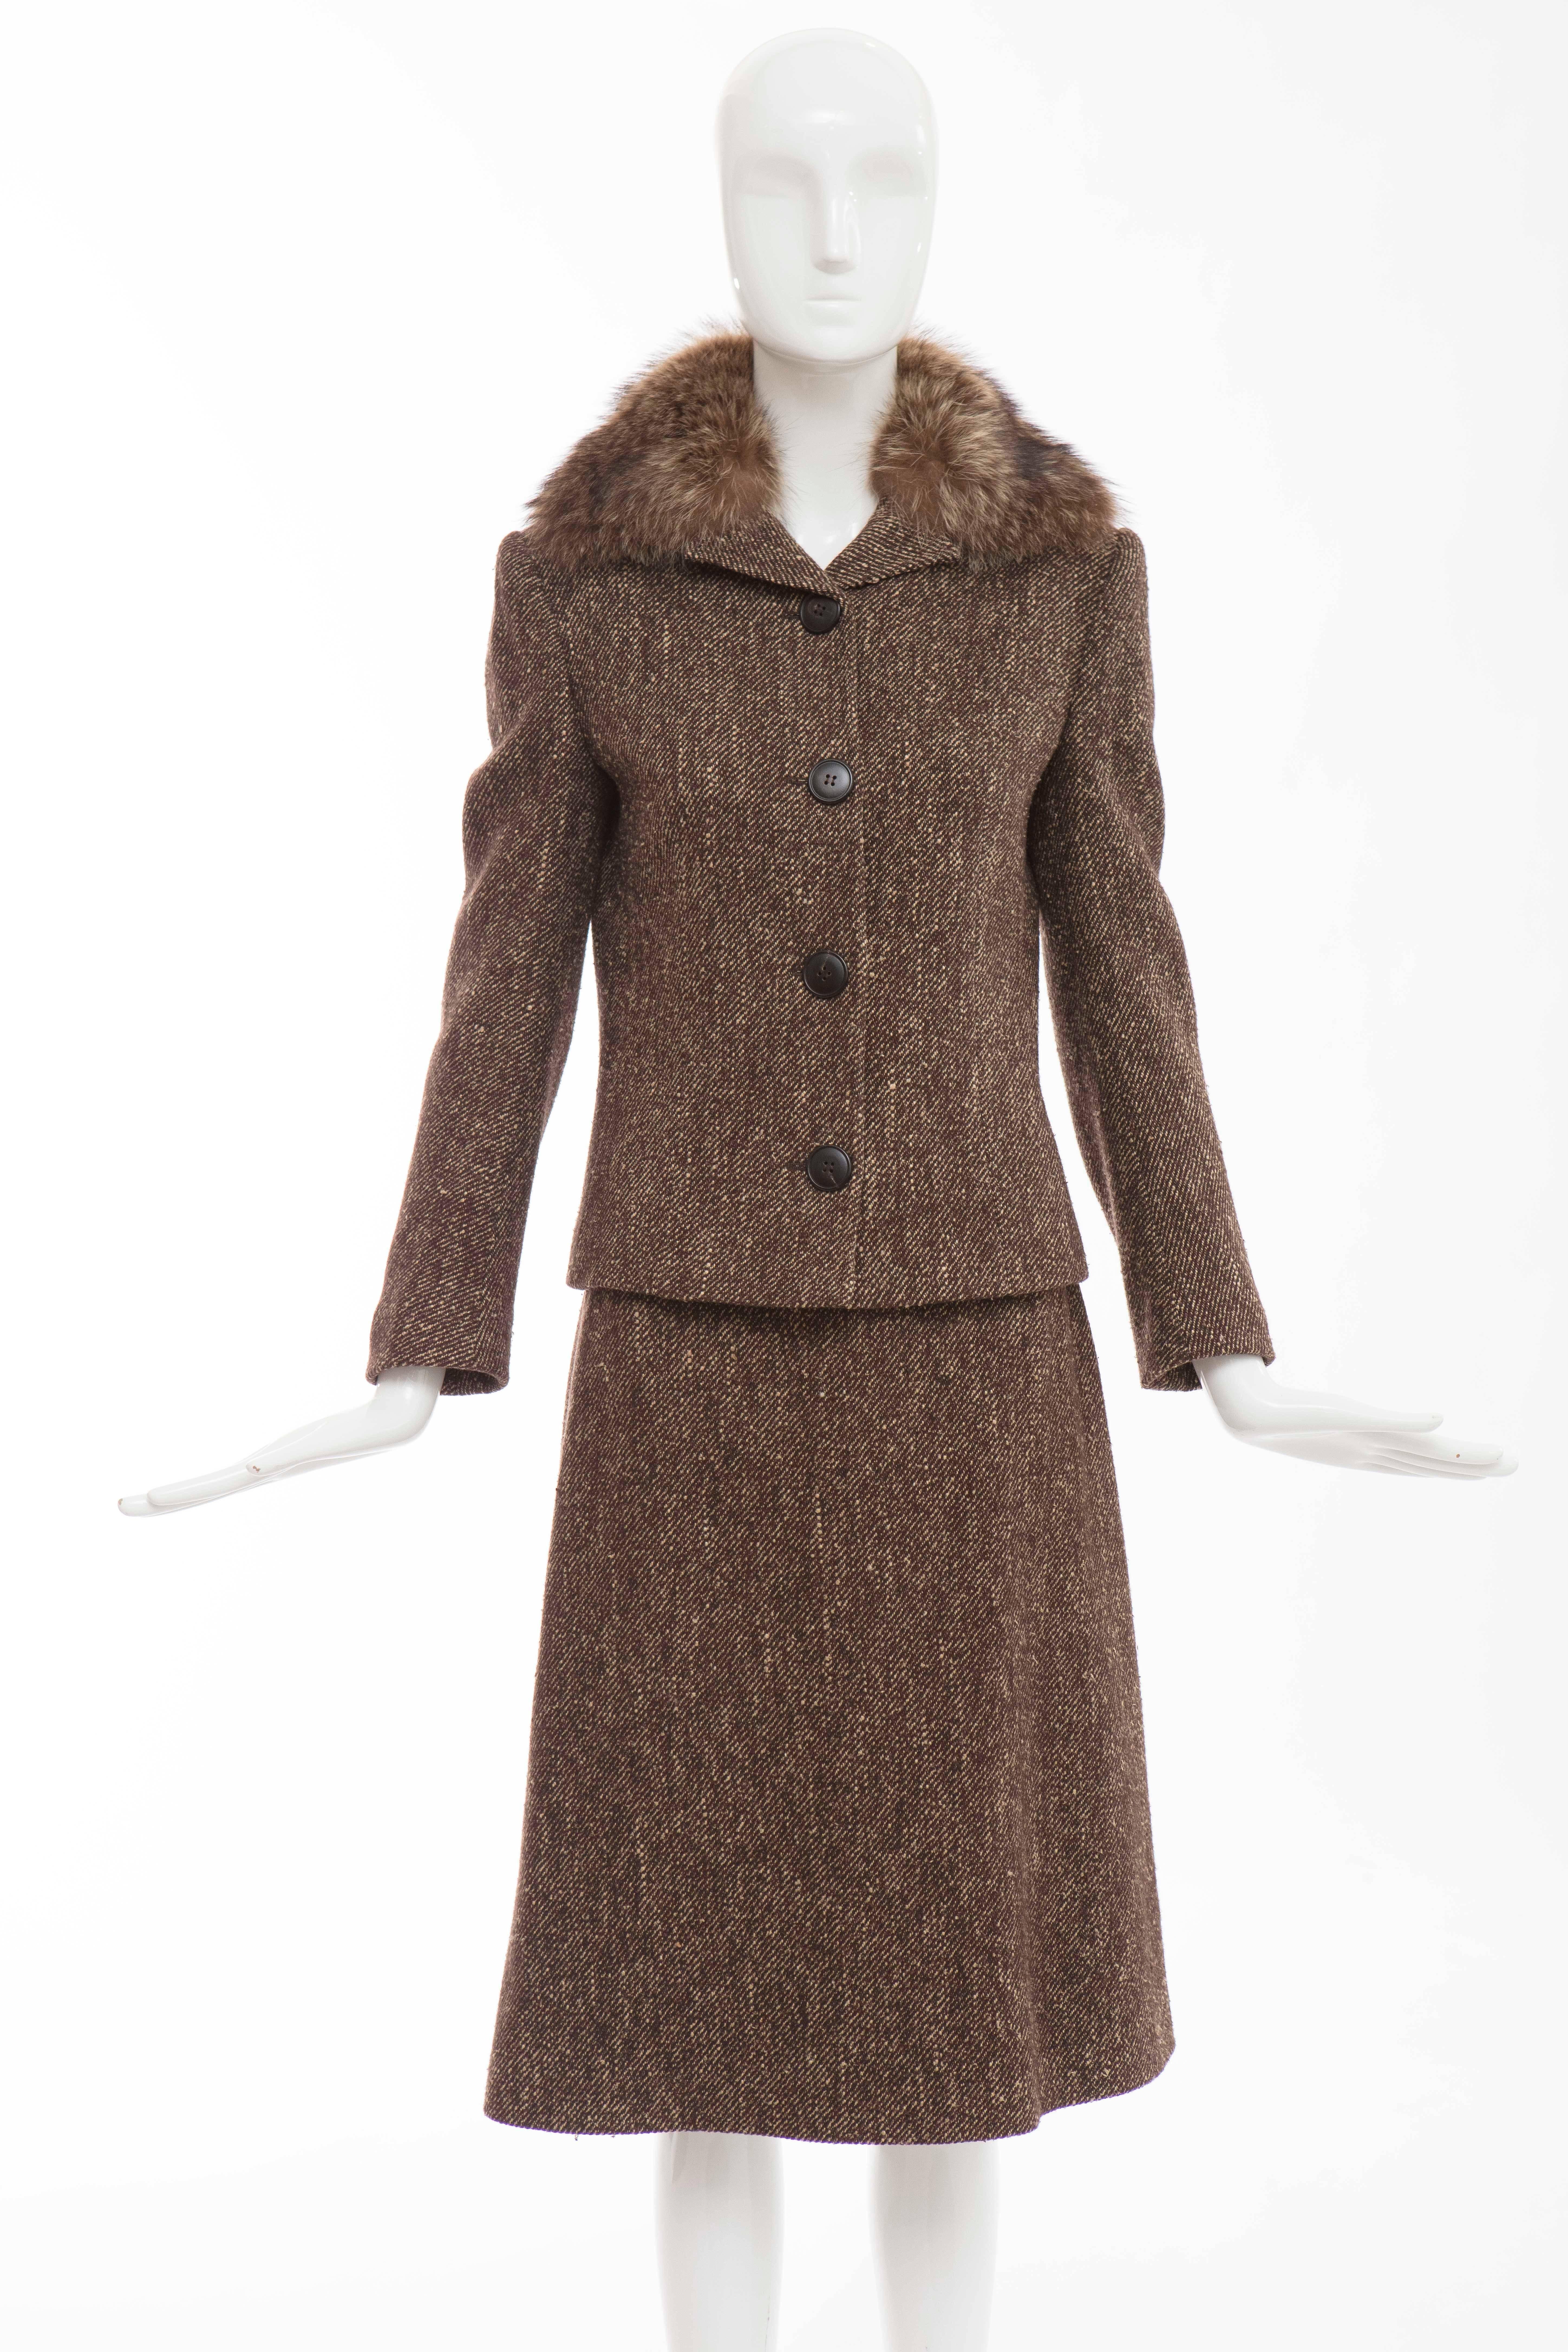 Dolce & Gabbana Brown Tweed Skirt Suit With Fur Collar For Sale 2